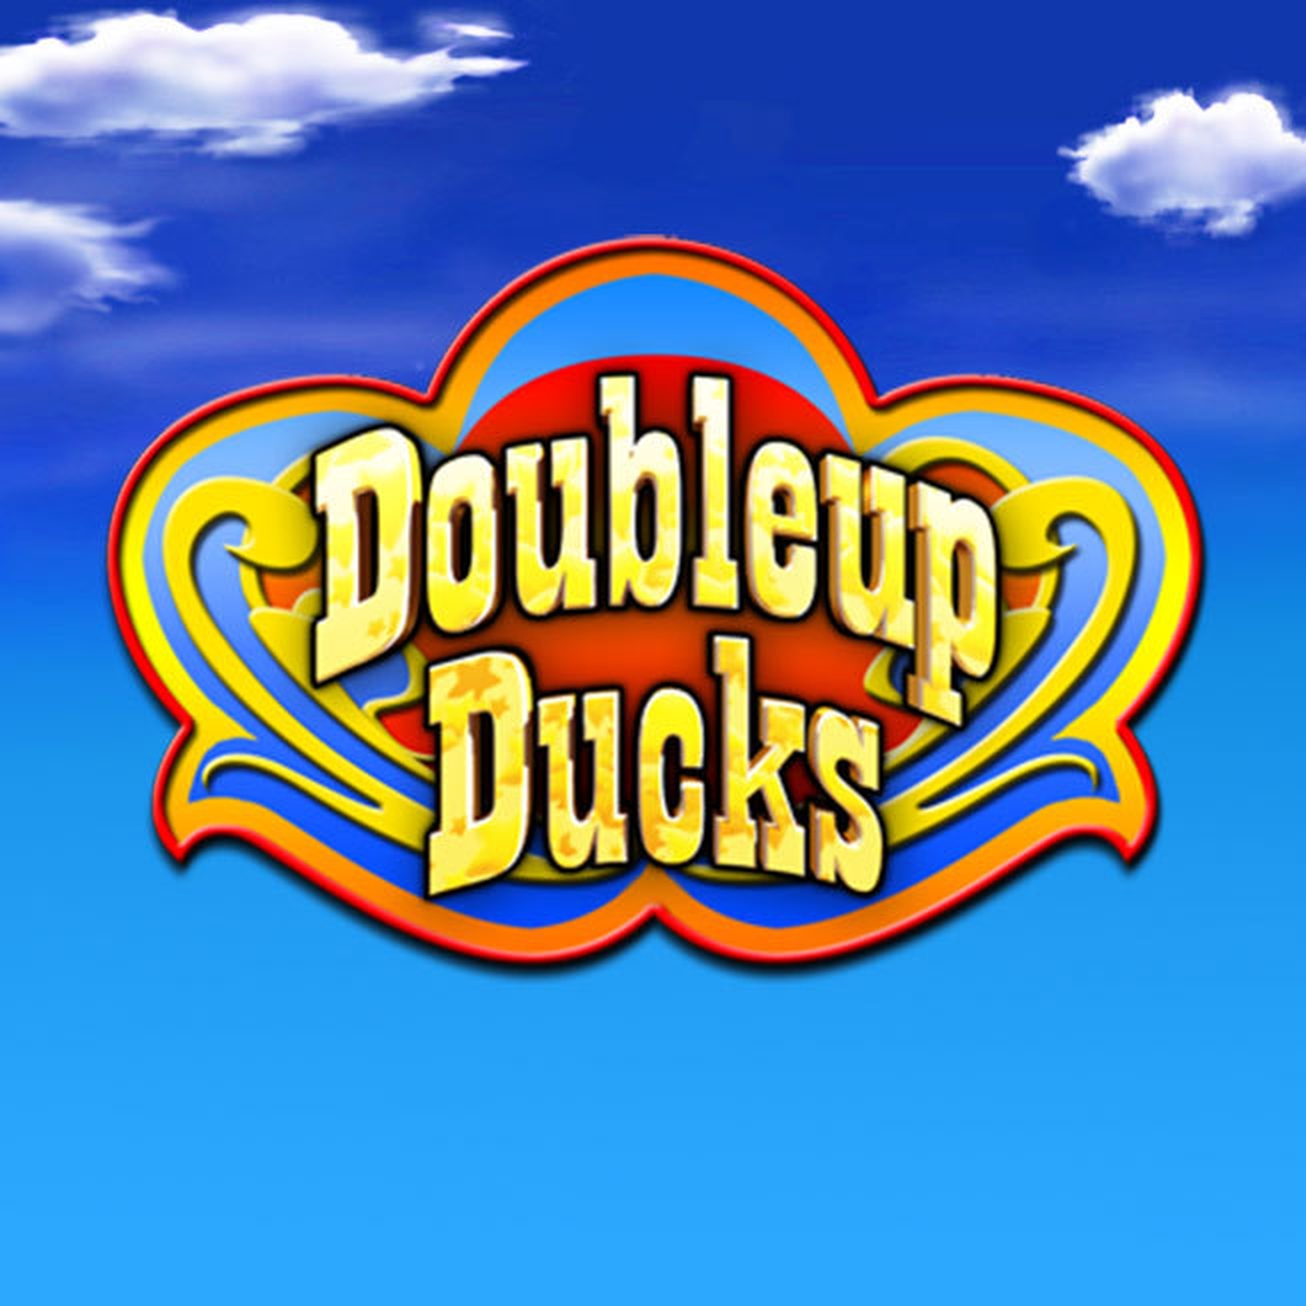 The Doubleup Ducks Online Slot Demo Game by EYECON